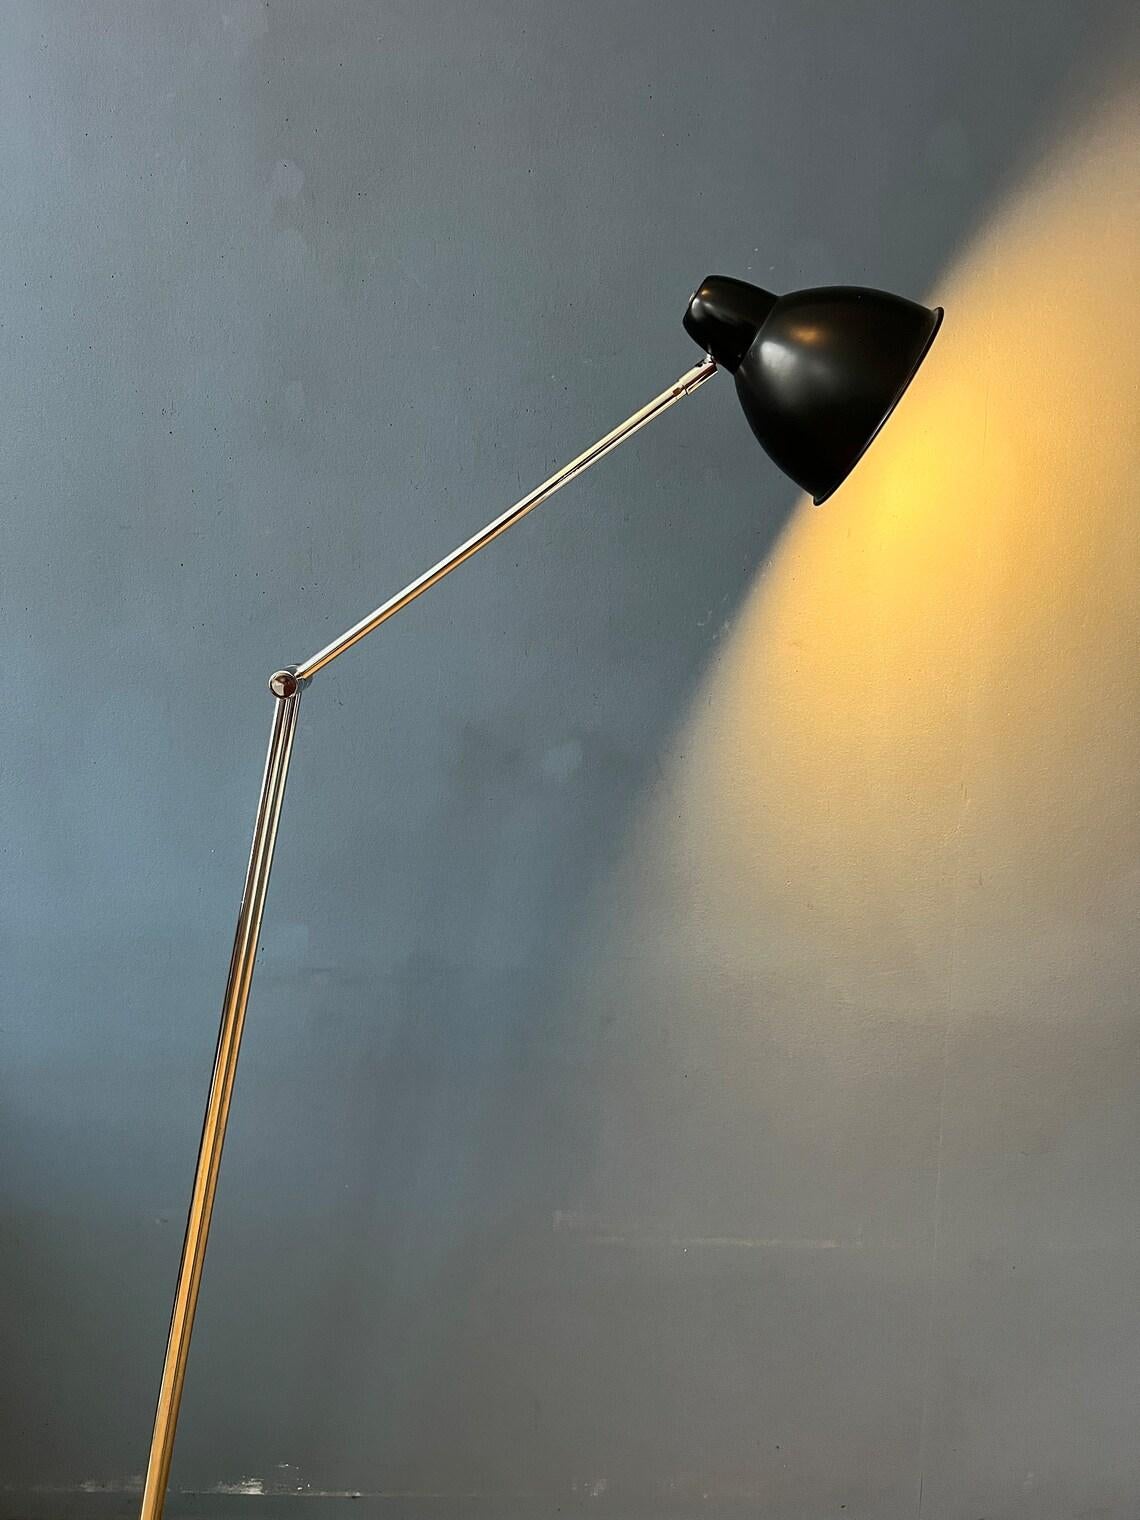 Unique mid century Hala zeist floor lamp. The lamp is extremely flexible. It can be adjusted at the base, in the middle of the chrome arm and the shade itself. This way the light can be positioned in any way desirable. For this reason the base is